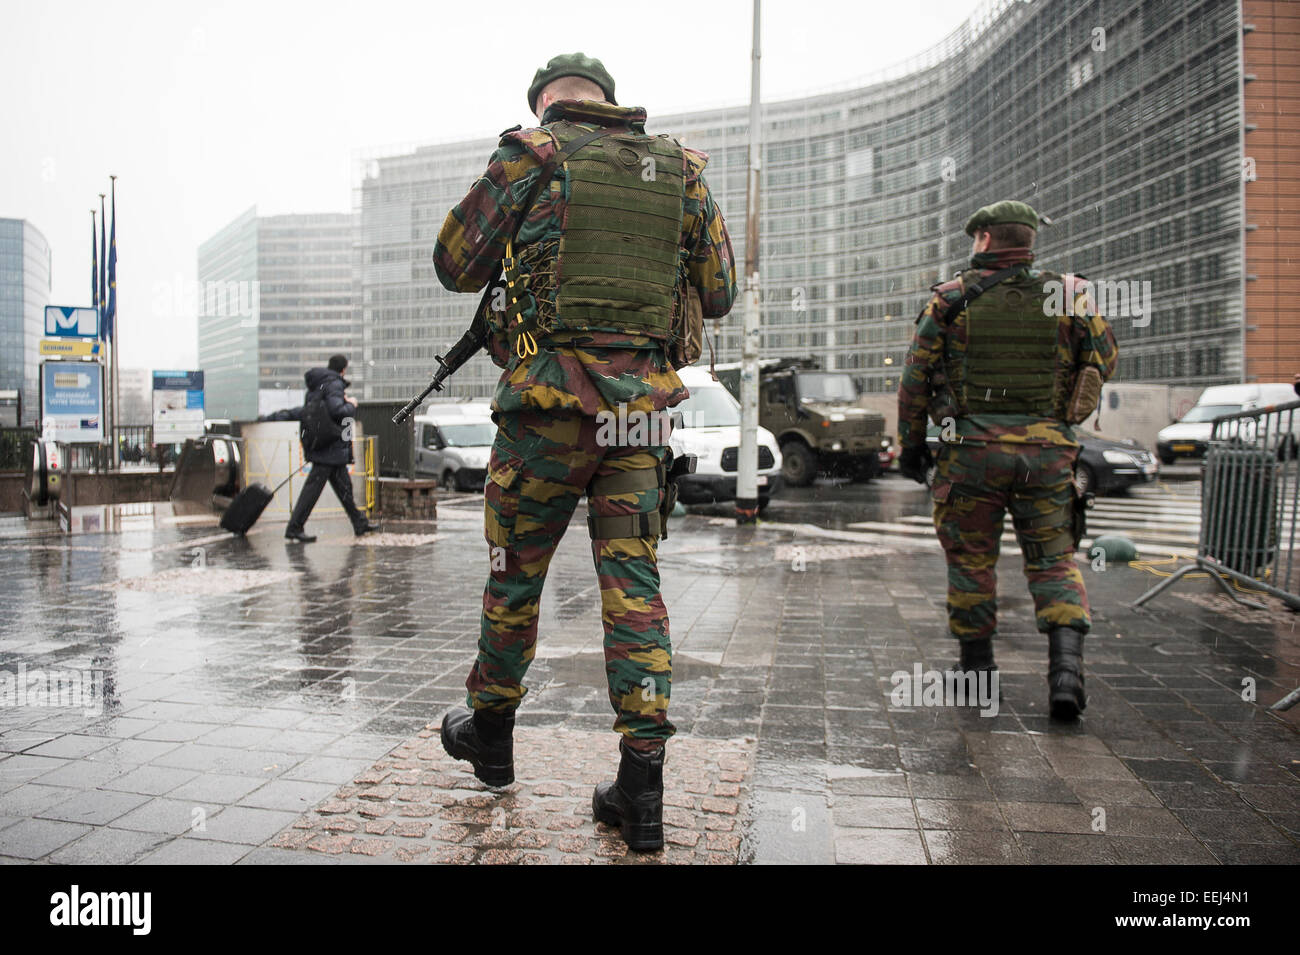 Brussels, Belgium. 19th Jan, 2015. Belgian soldiers stand on guard outside European Union headquarters in Brussels, Belgium on 19.01.2015 Belgian troops were deployed at sensitive sites in Brussels and Antwerp to upgrade security presence after a series of raids on suspected Islamic jihadists in various locations across Belgium with 13 arrests on Thursday evening and two people killed as part of a raid on a premise in the eastern town of Verviers. Another 150 troops will be deployed next week, as local media reports. Credit:  dpa picture alliance/Alamy Live News Stock Photo